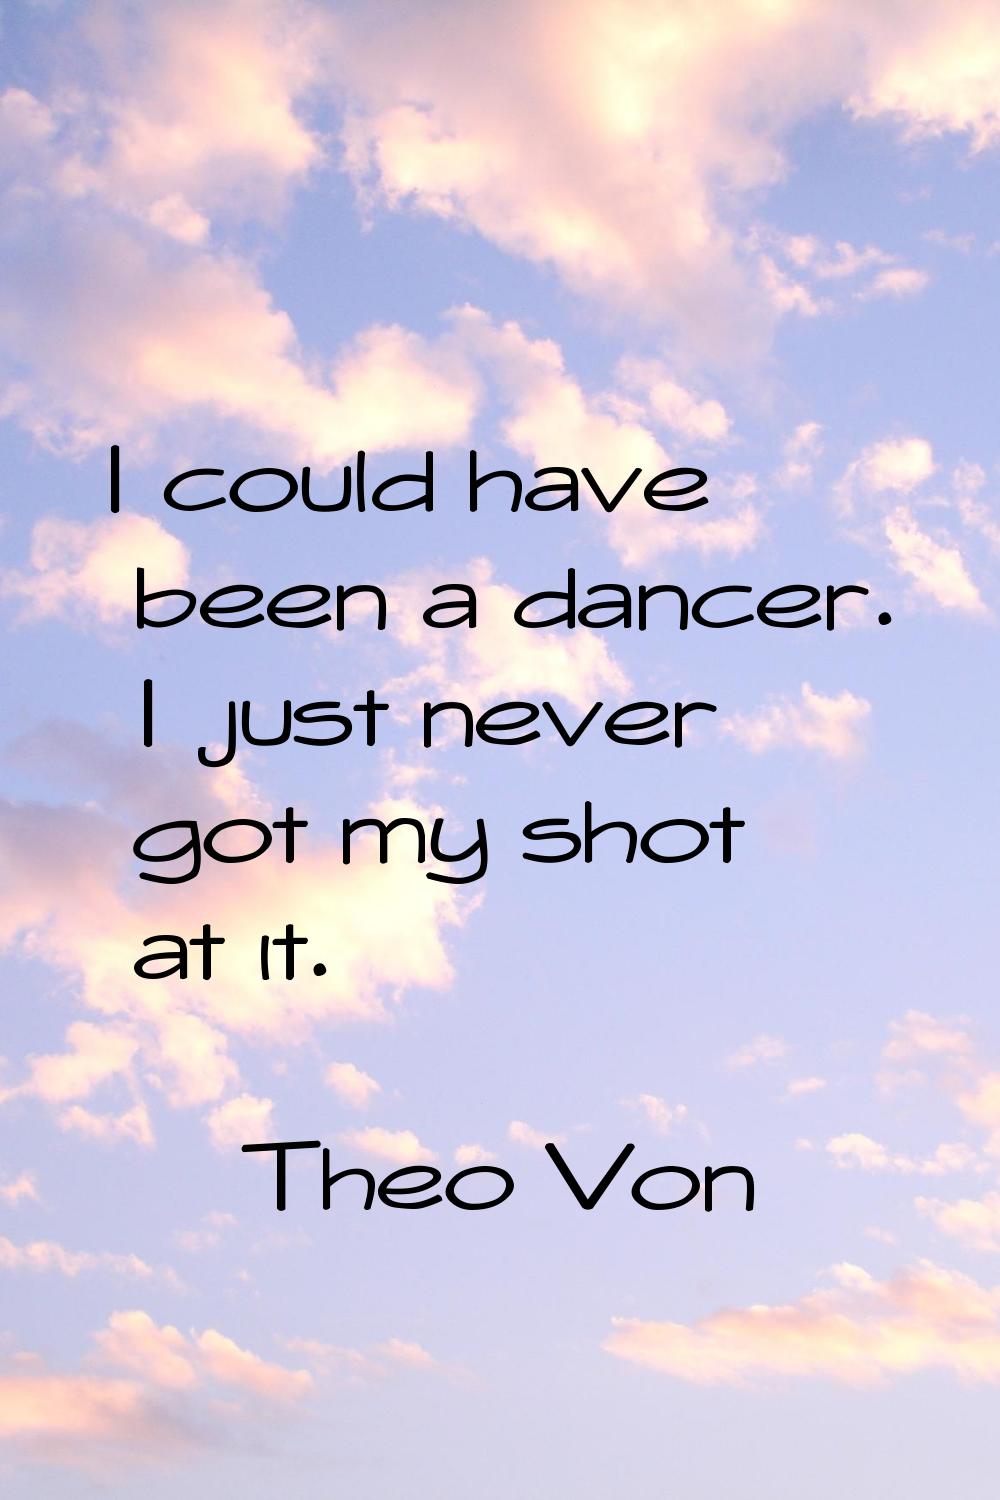 I could have been a dancer. I just never got my shot at it.